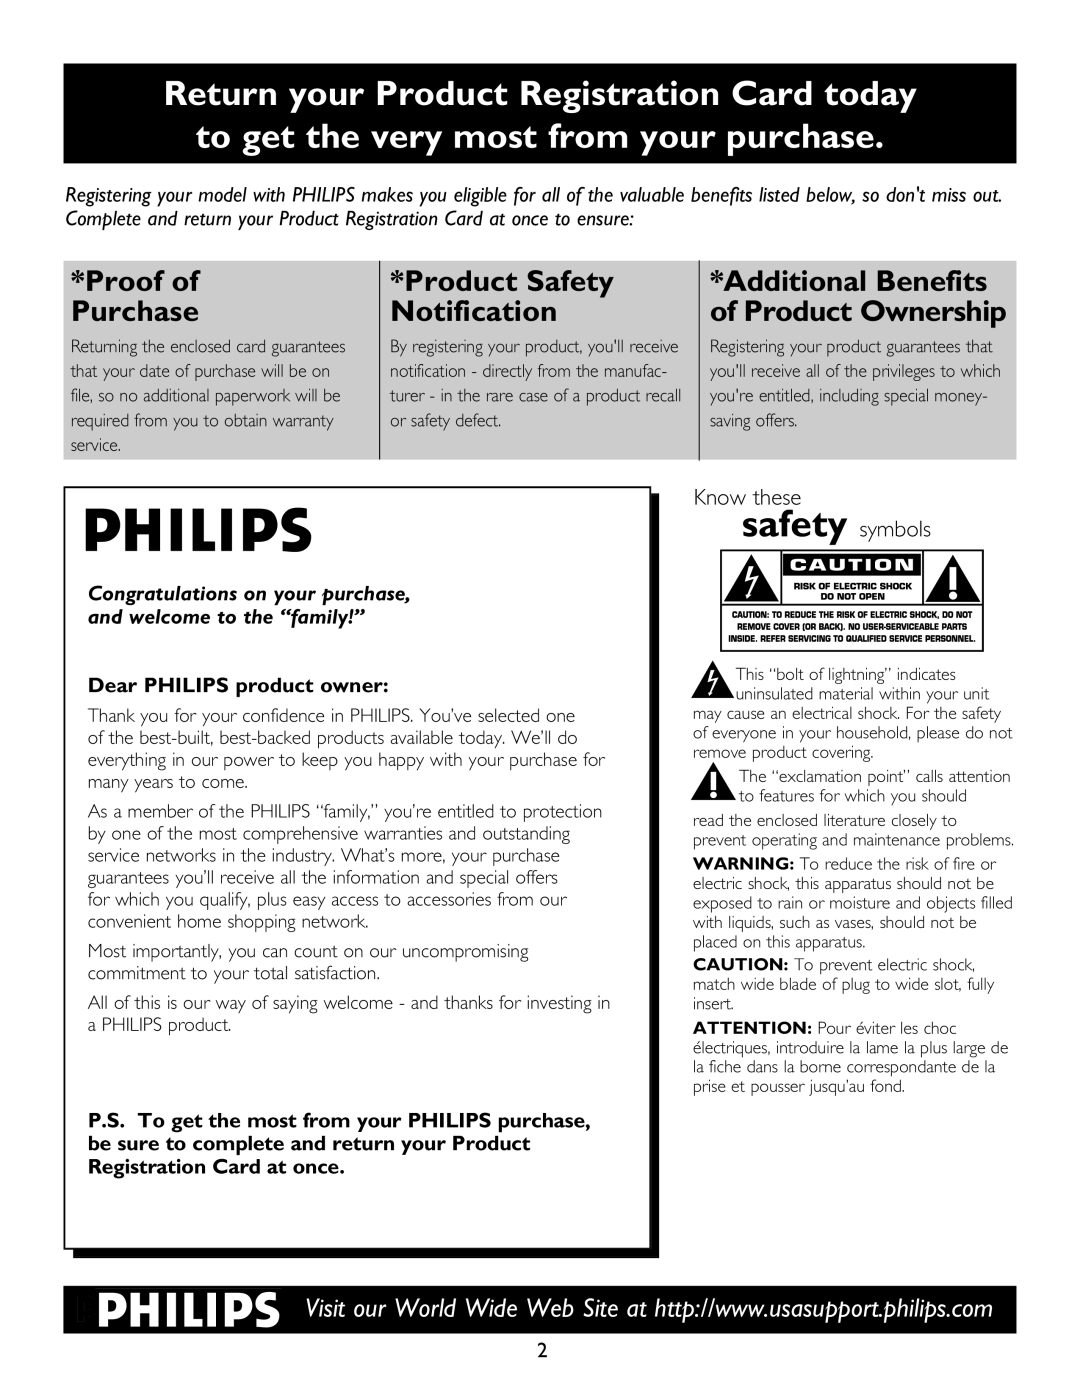 Philips 30PW9110D Product Safety Notification, Dear PHILIPS product owner, Proof of Purchase, Know these safety symbols 